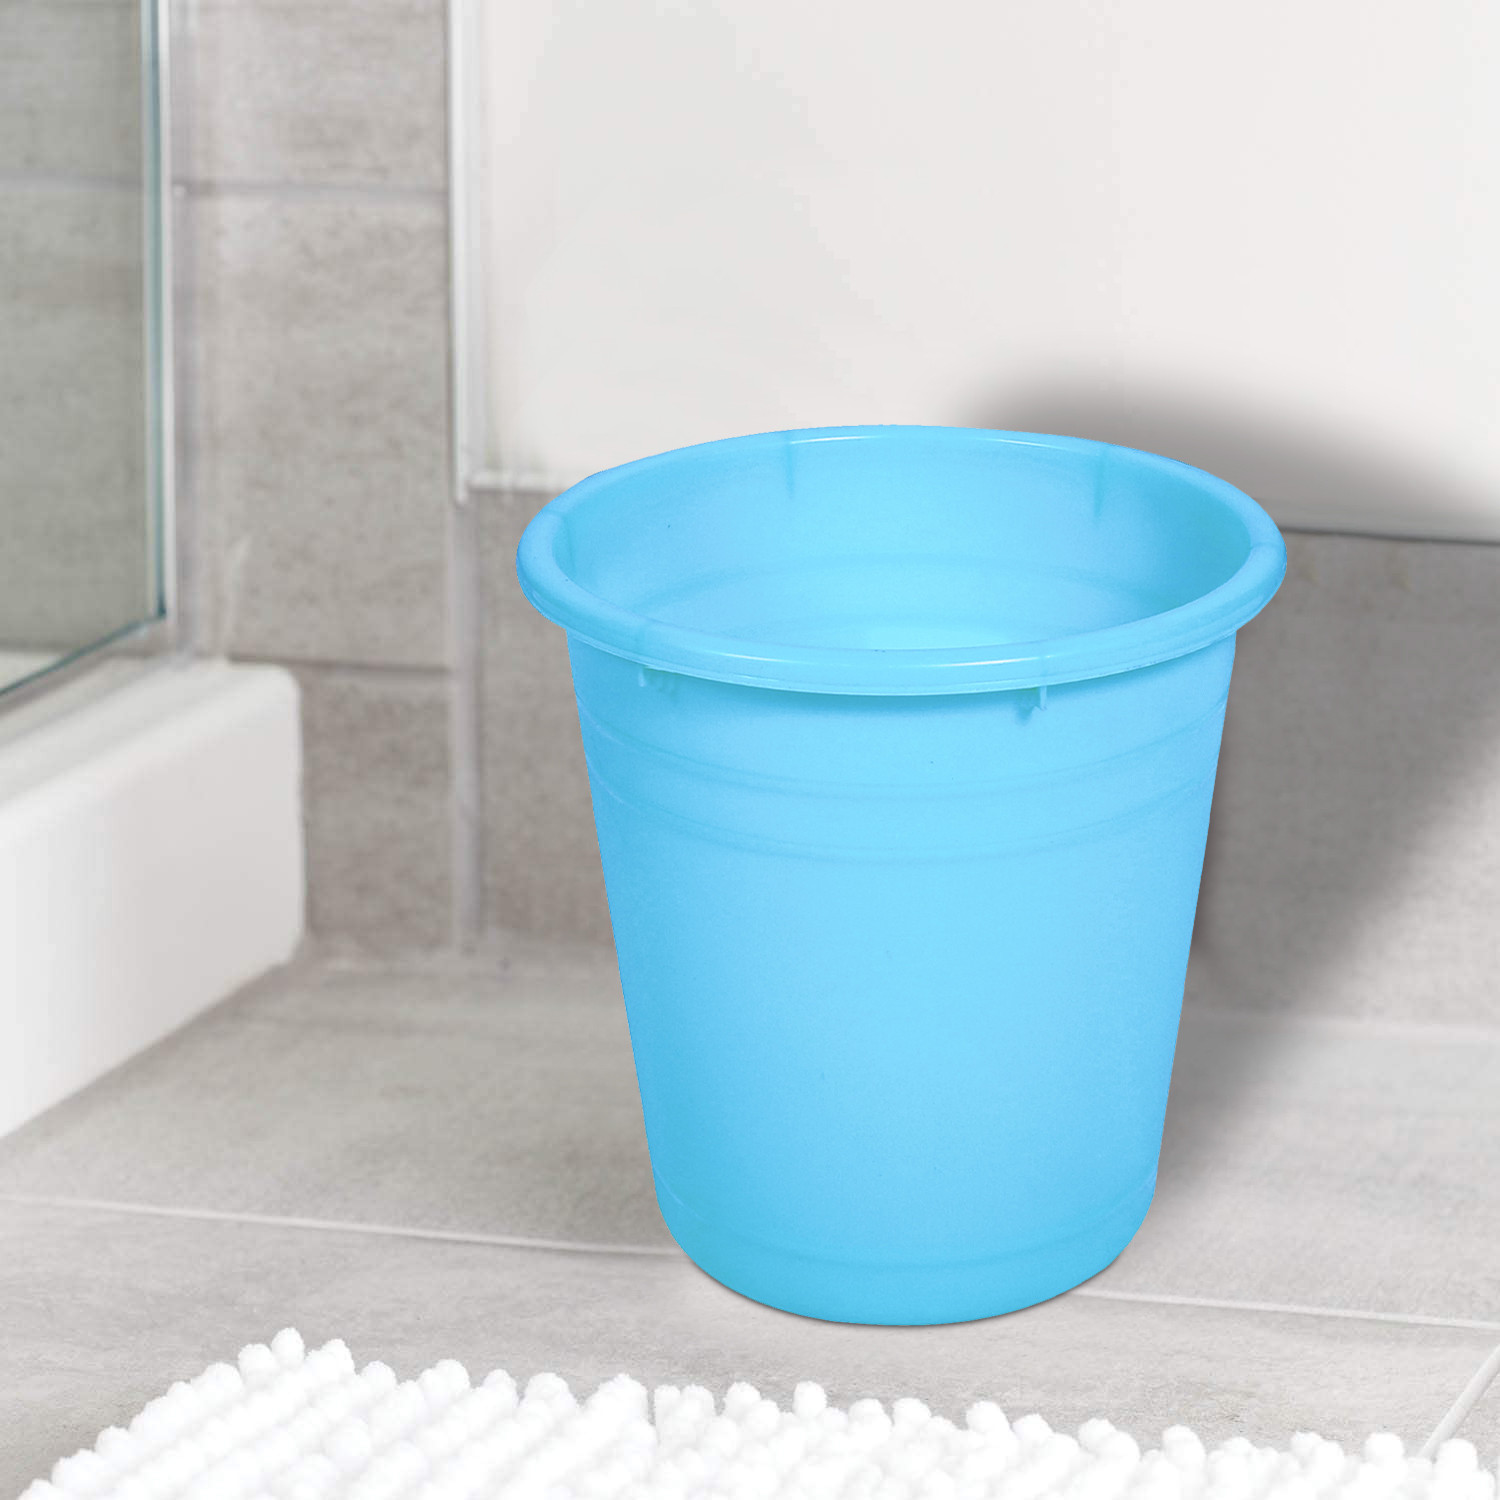 Kuber Industries Plastic Dustbin|Portable Garbage Basket & Round Trash Can for Home,Kitchen,Office,College,10 Ltr.(Sky Blue)